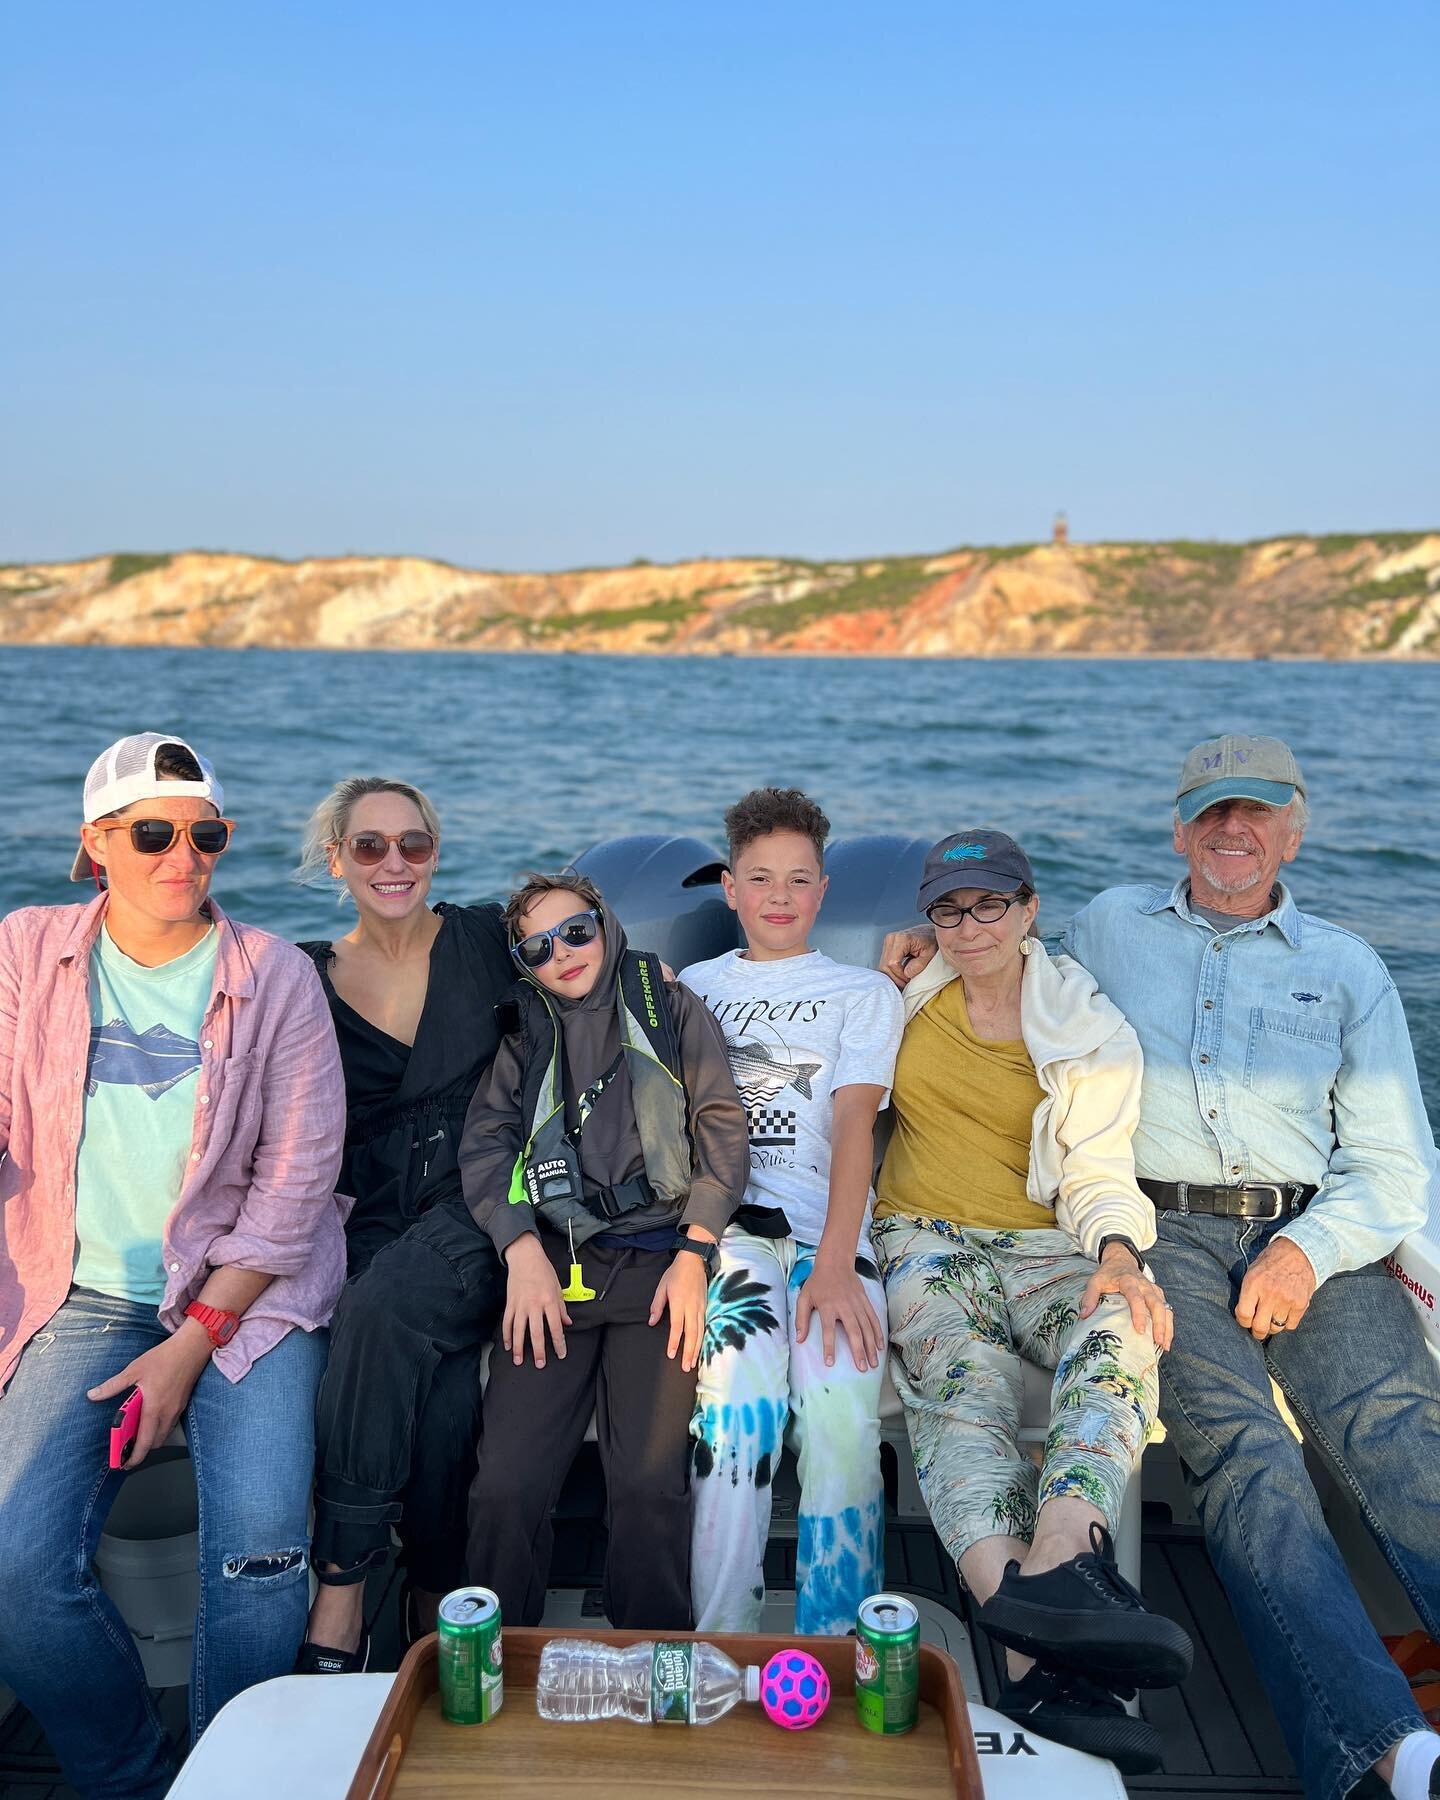 Thank you to this lovely group for bidding on our charter at last spring&rsquo;s Bivalve Ball. We are proud to support the very important work of the Martha&rsquo;s Vineyard Shellfish Group. In addition to their hatchery and seeding programs, @mvshel